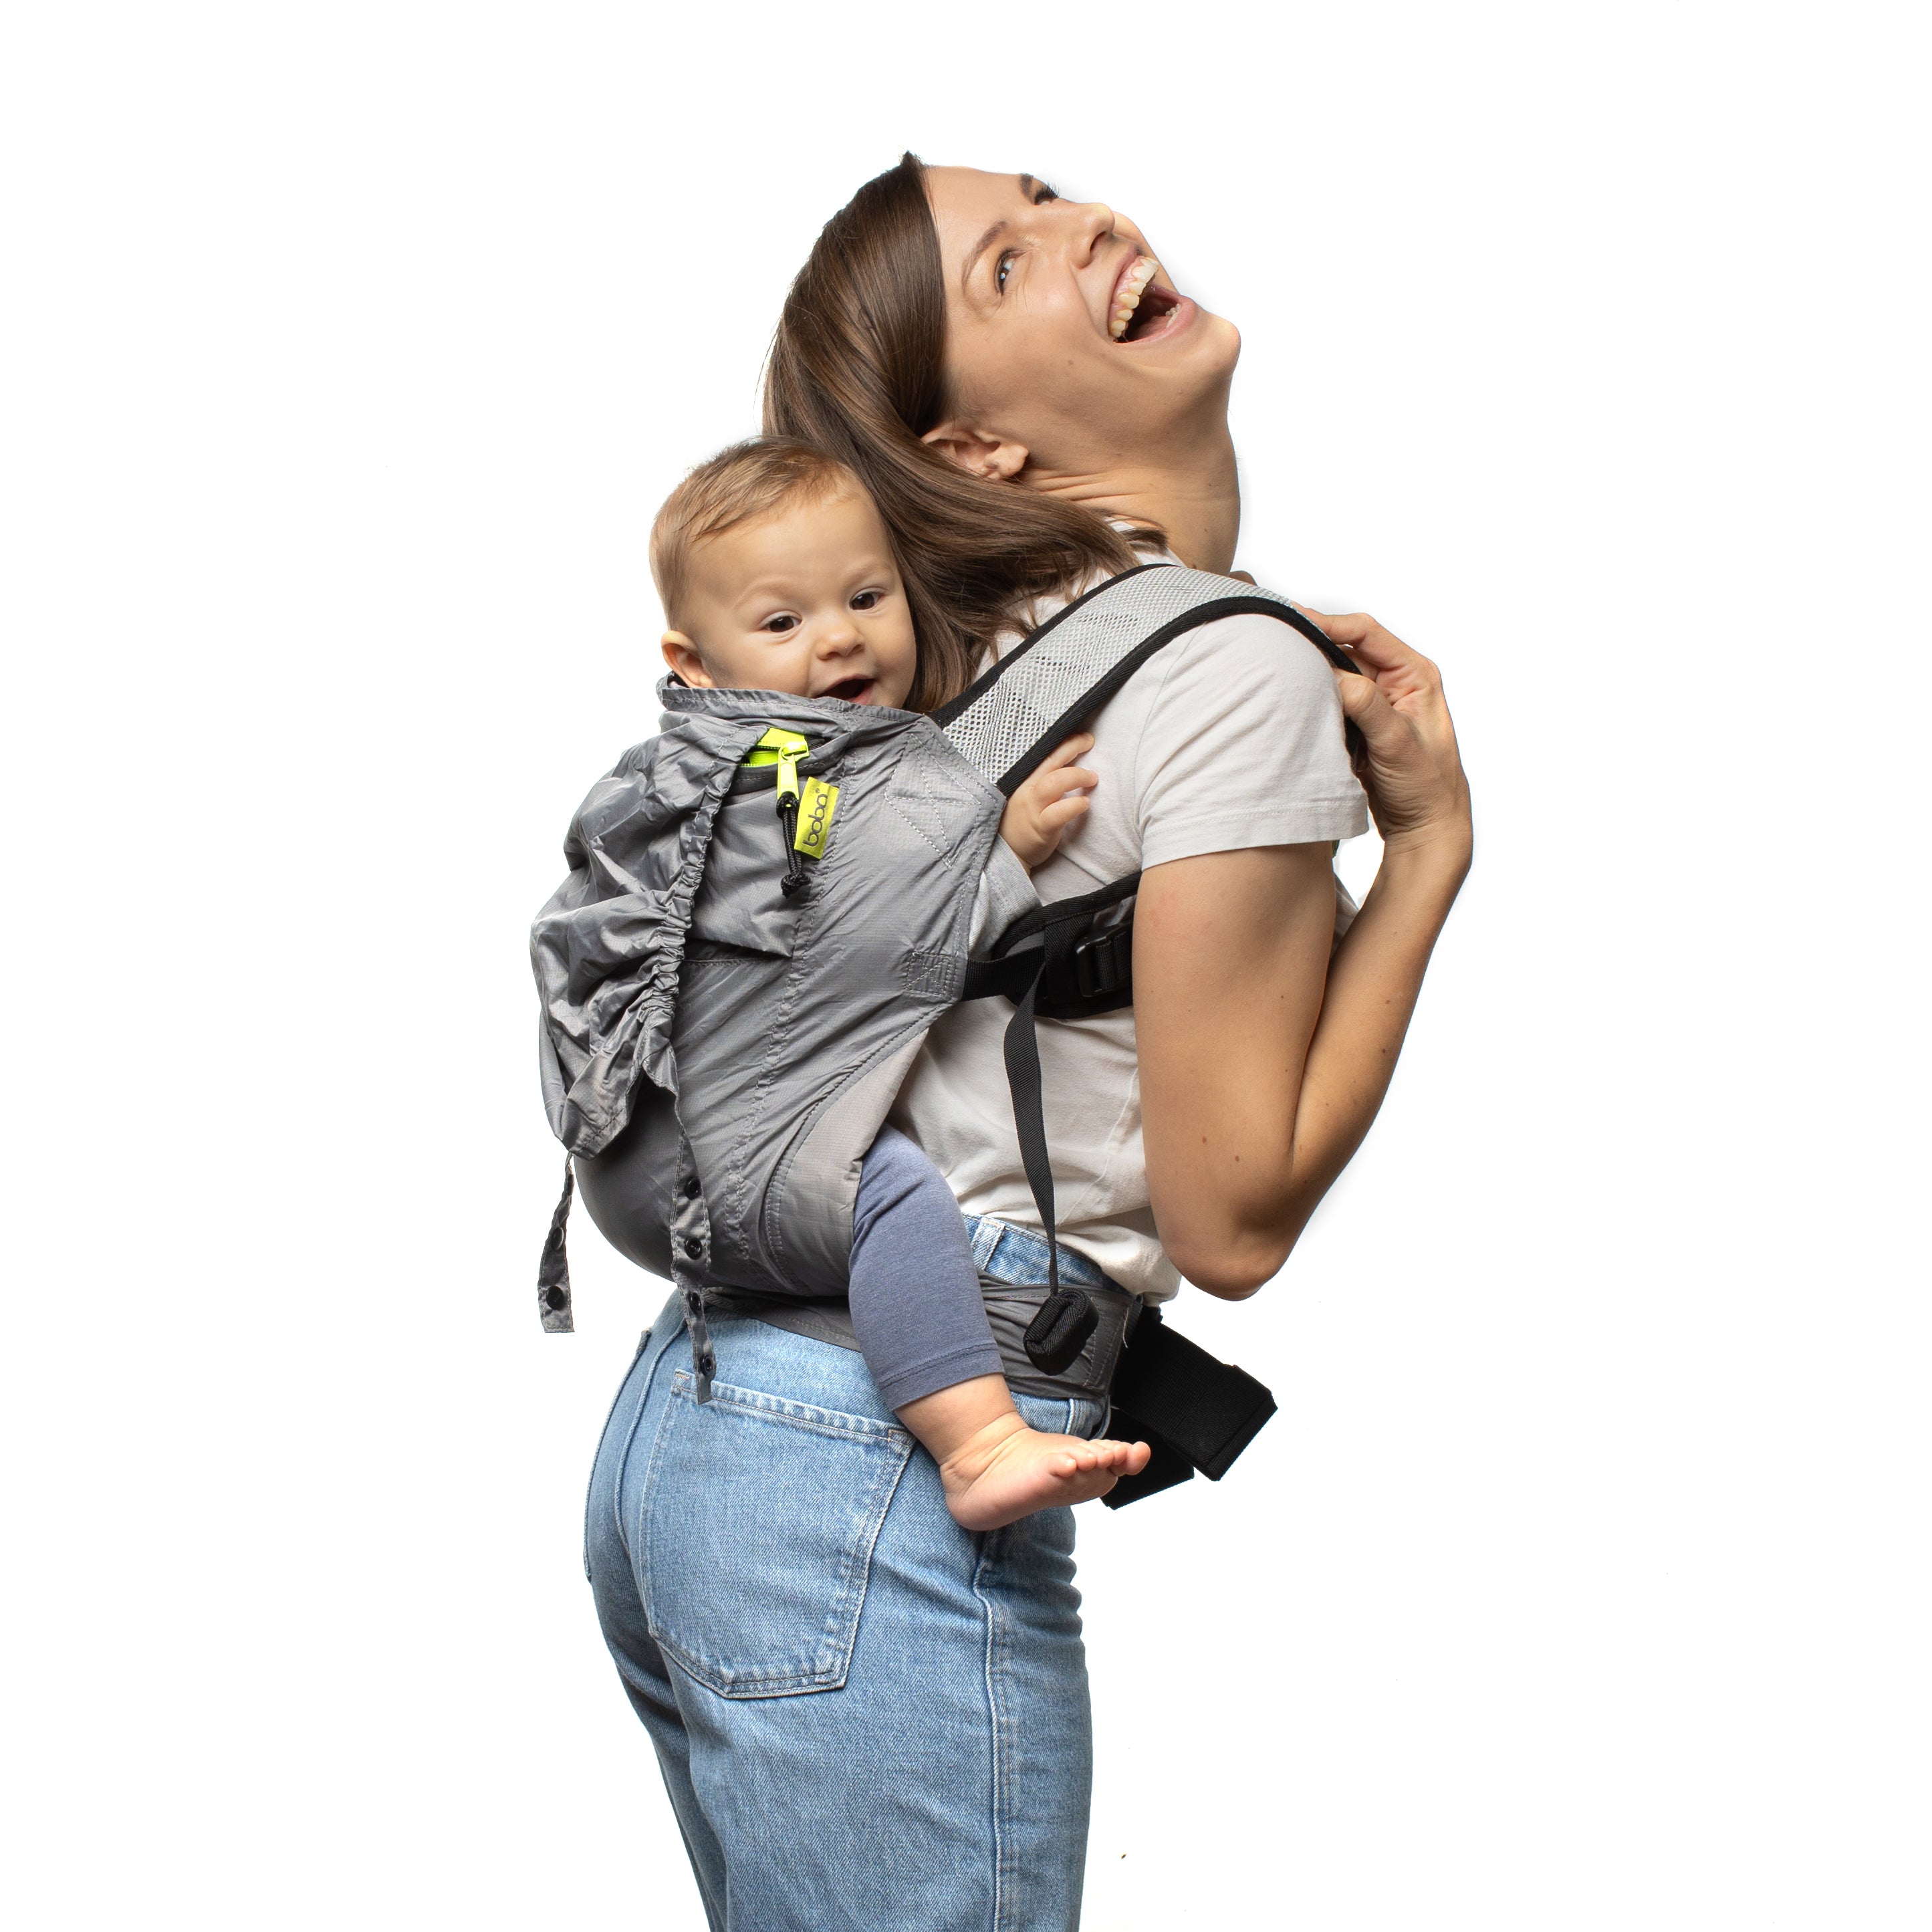 Mom laughing with her baby daughter on her back in an ergonomic back carry position in the gray boba air.